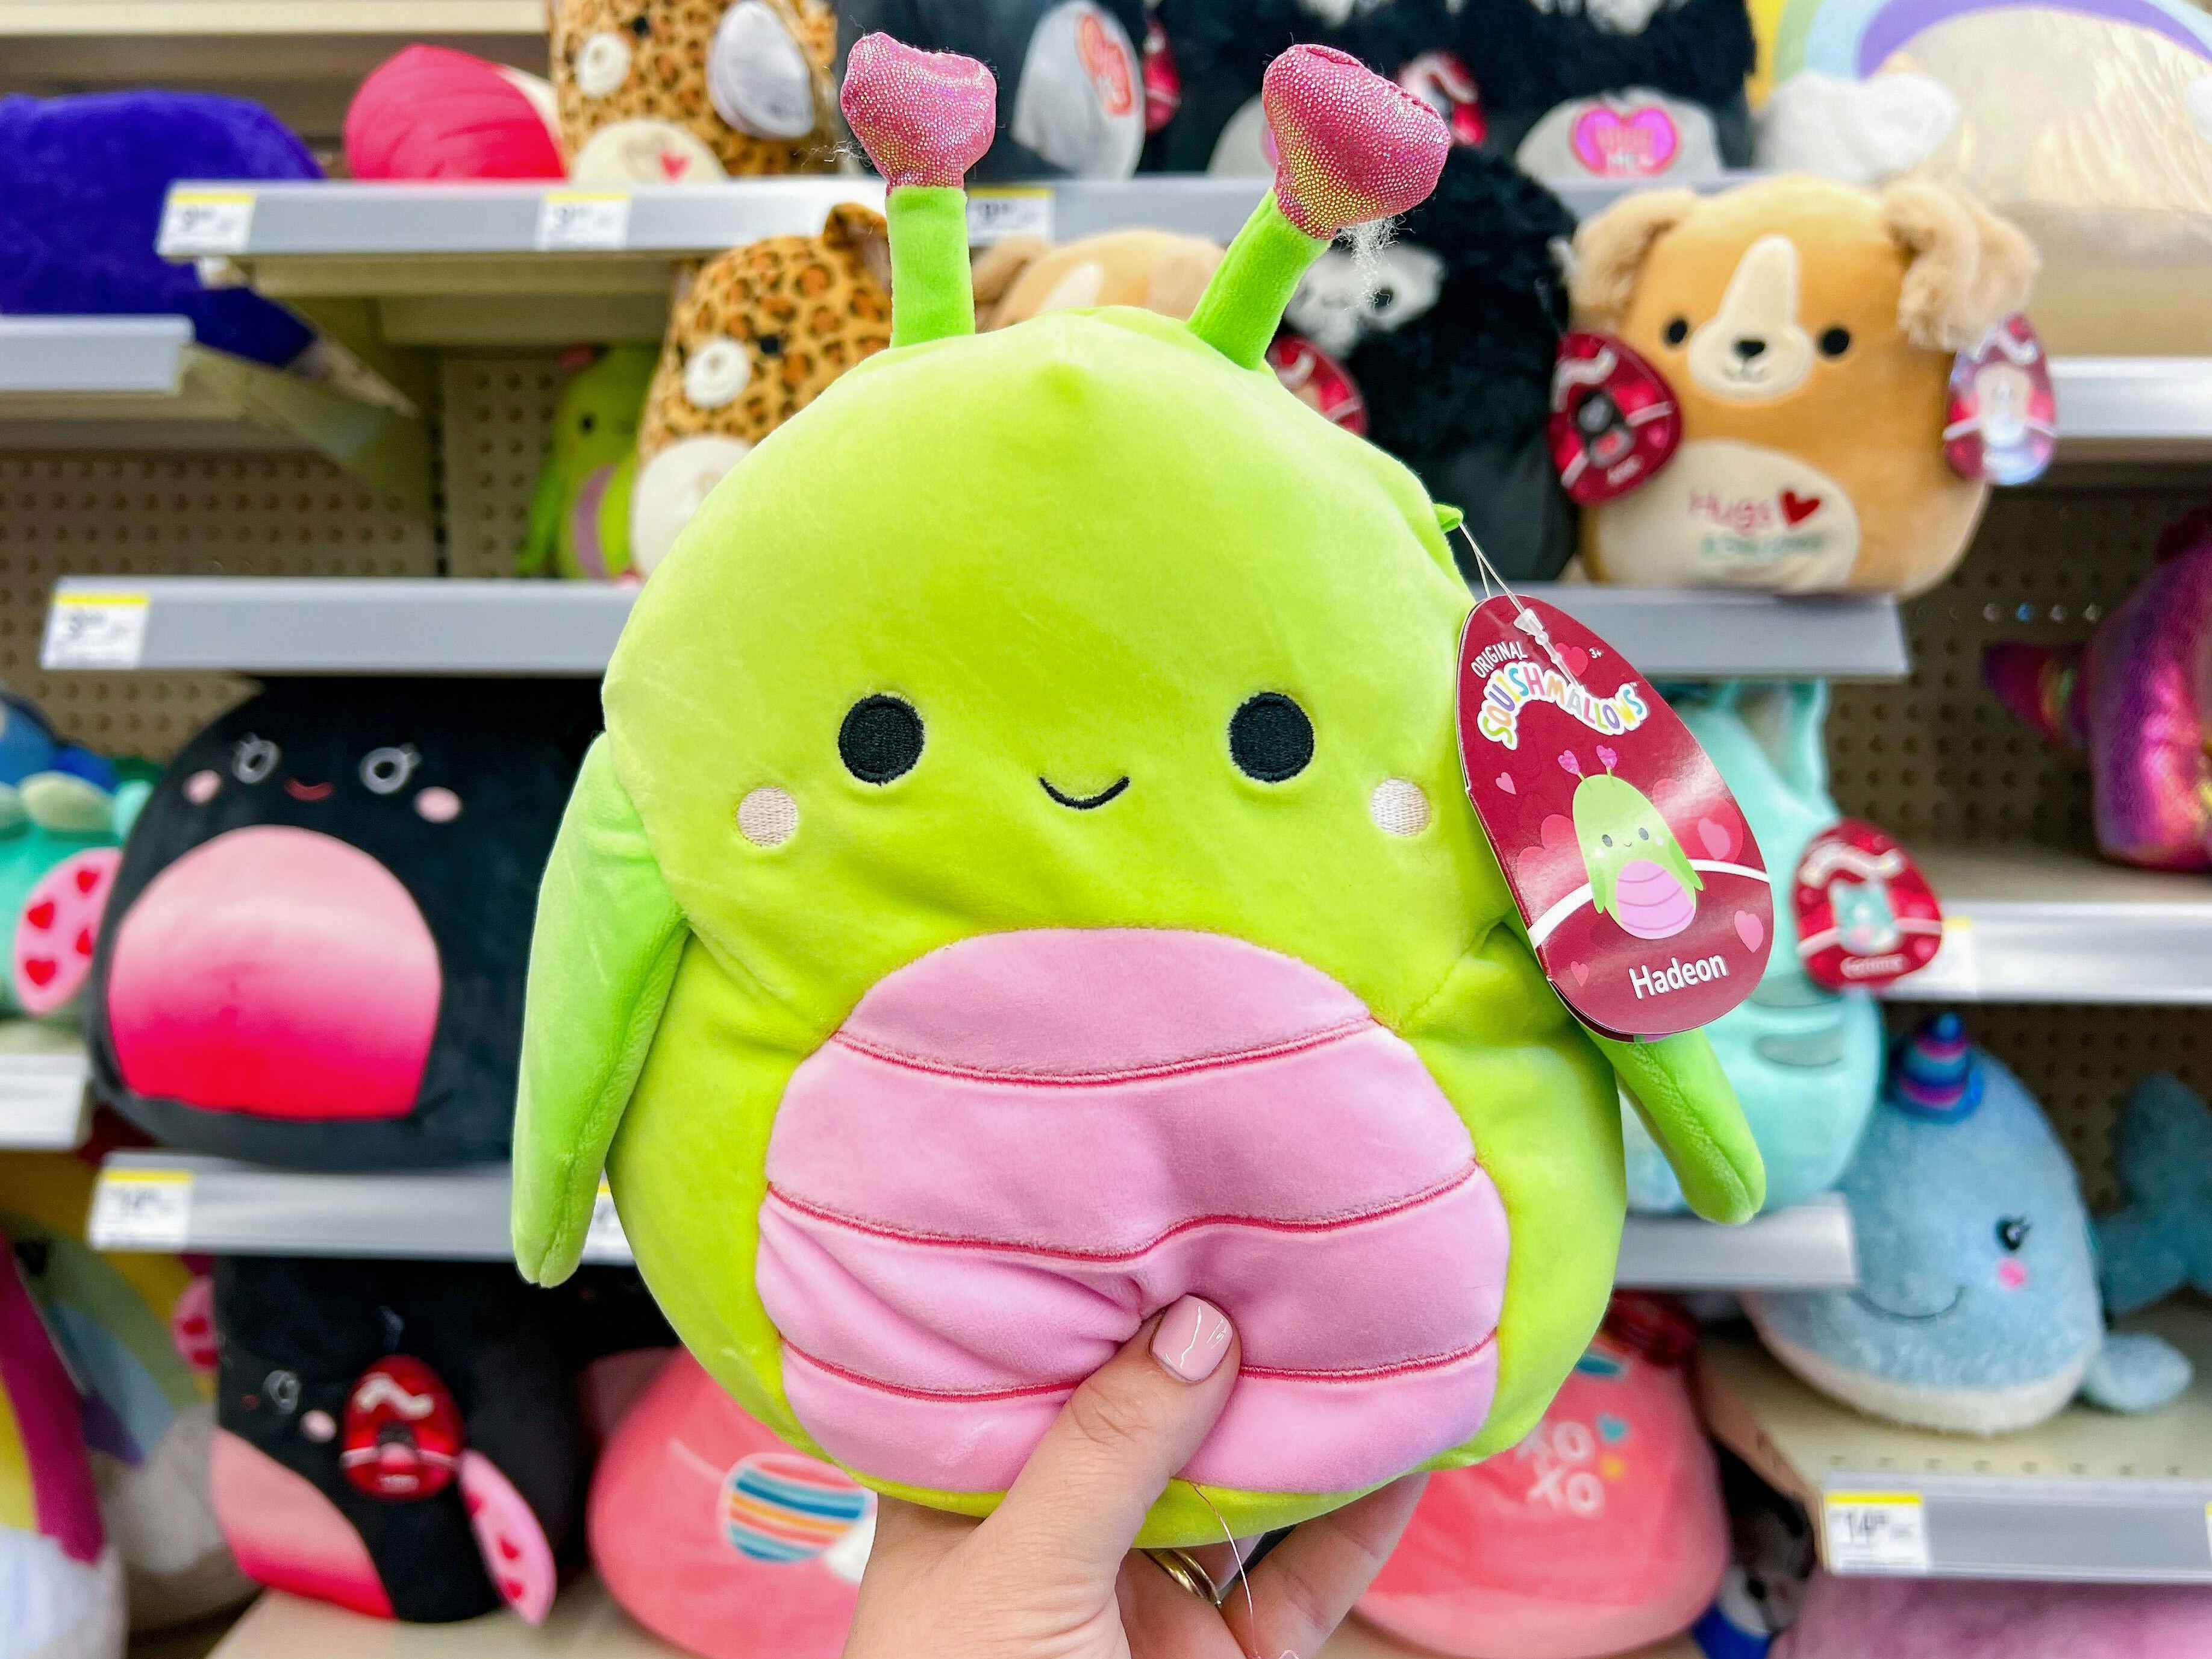 Someone holding up a Hadeon Valentine's Day Squishmallow in Walgreens